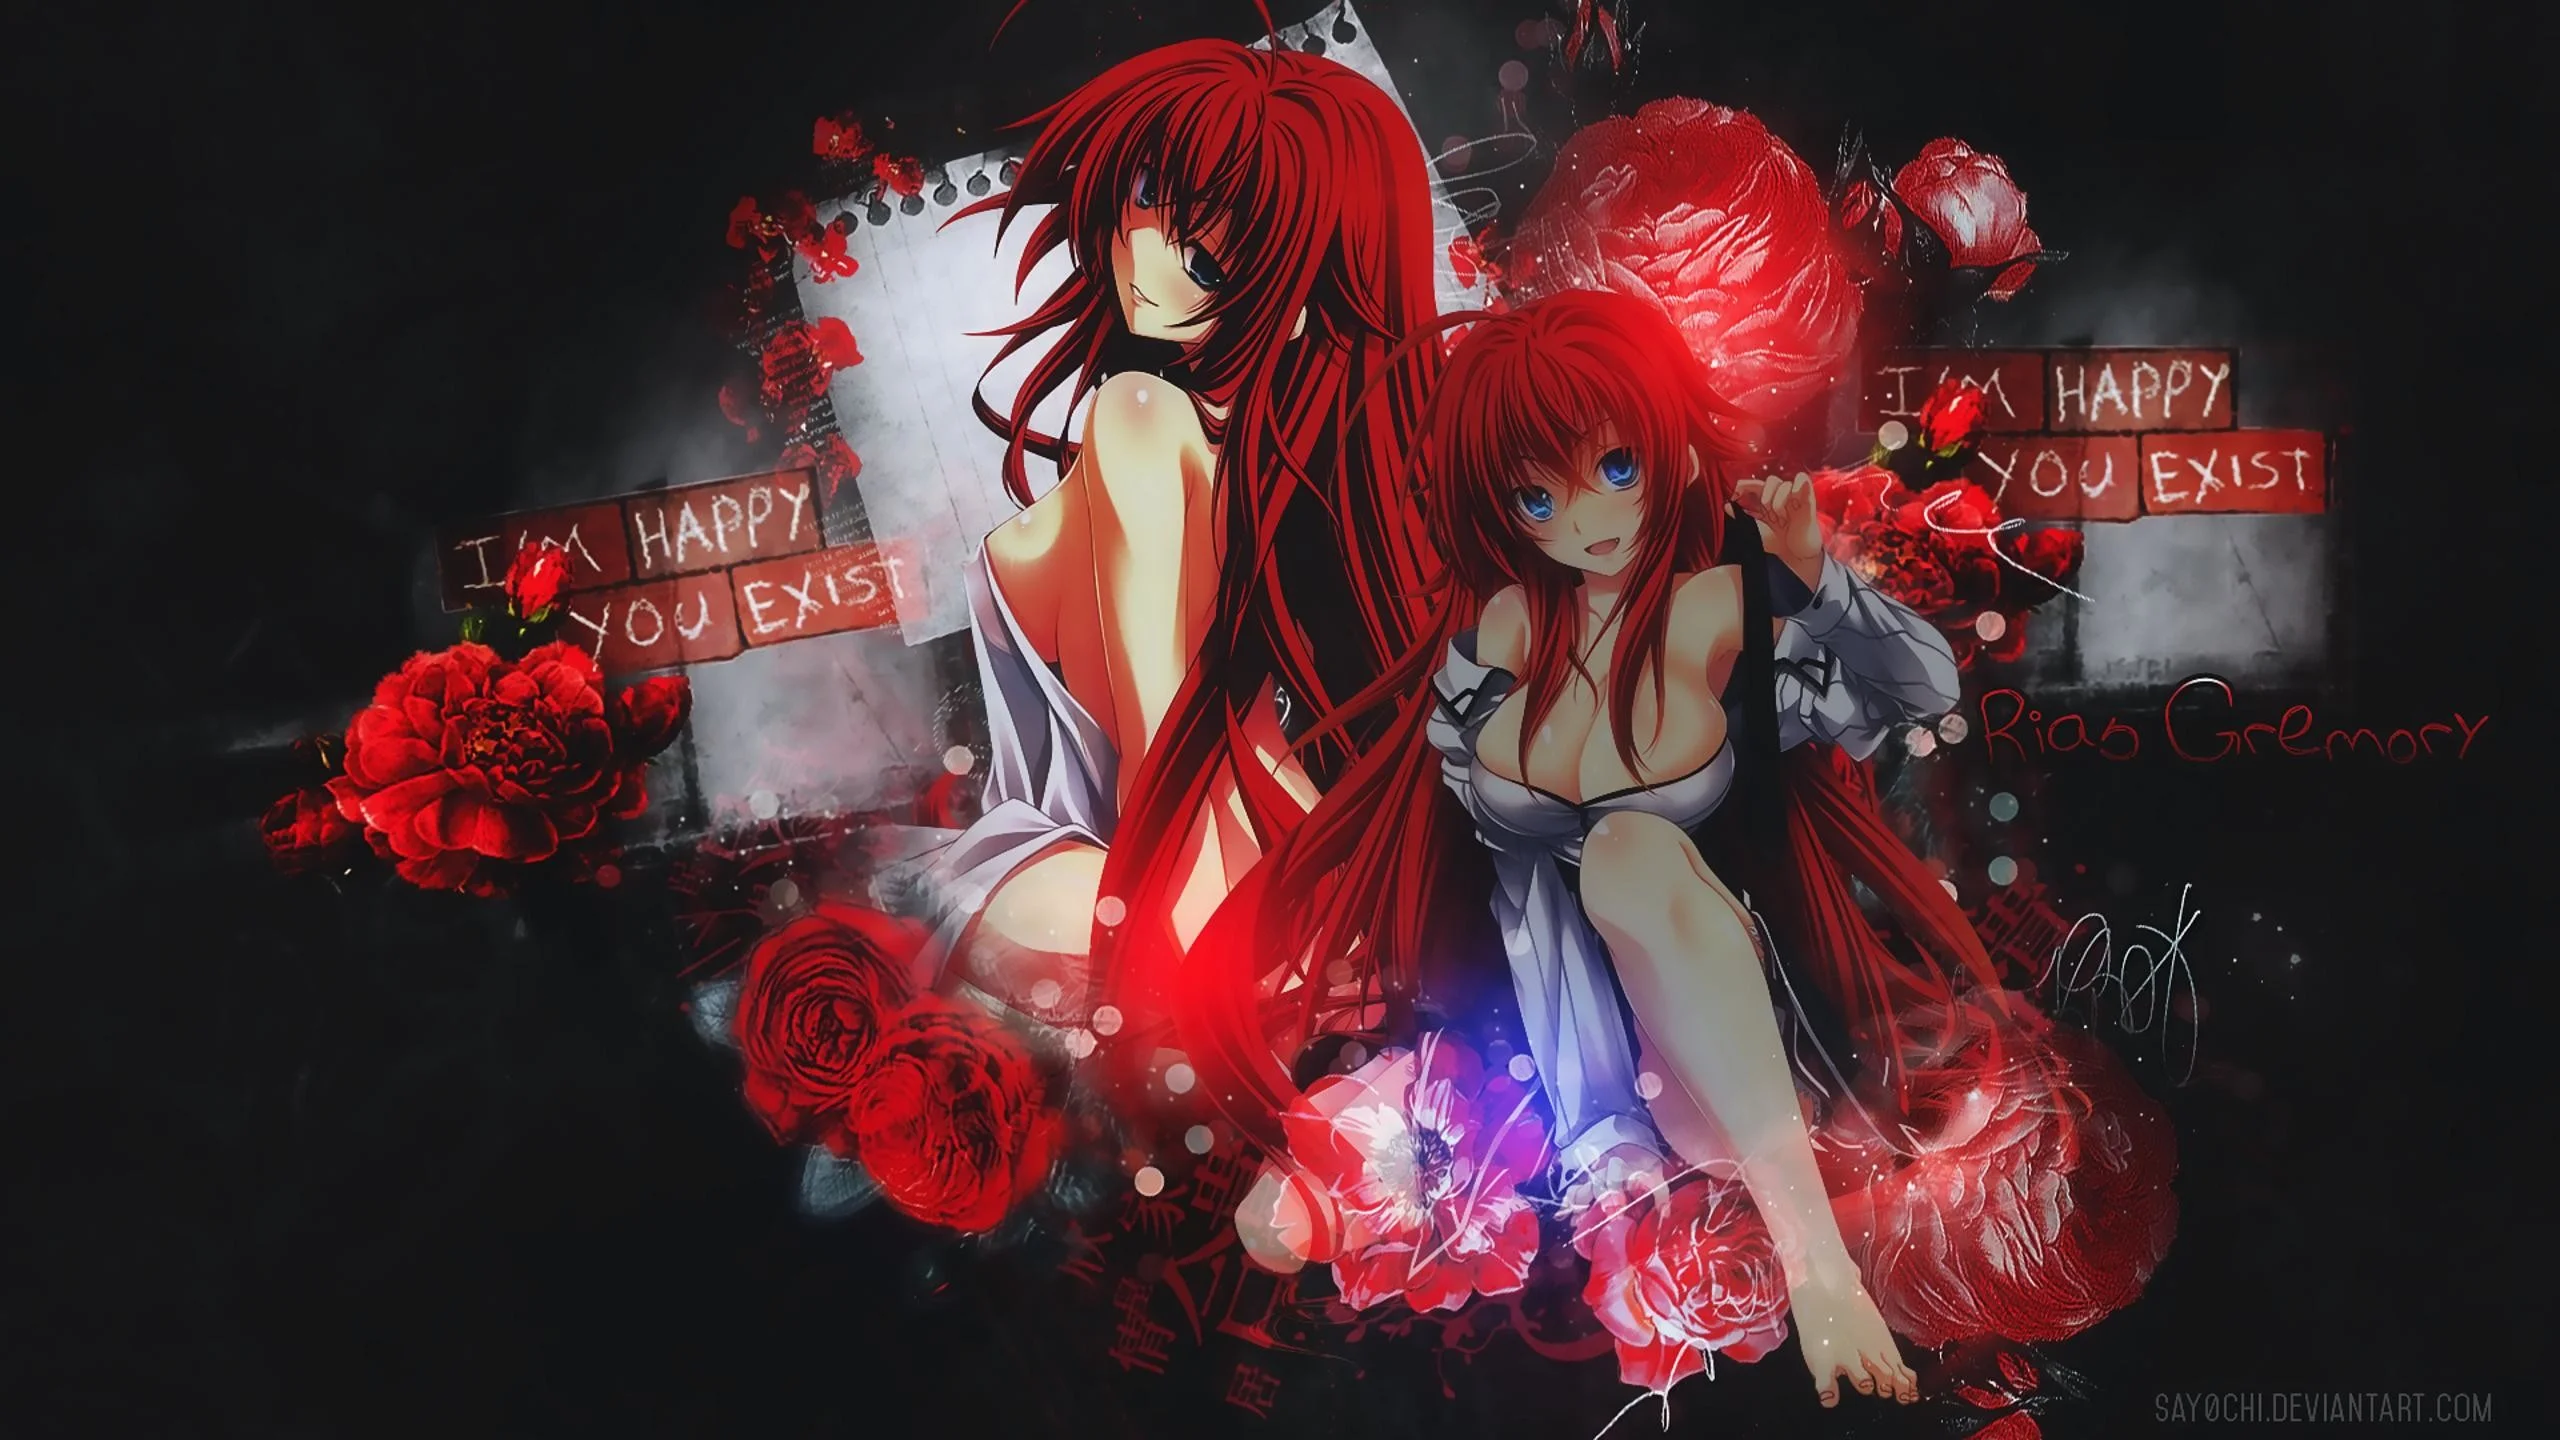 Never Search For A High School DxD Wallpaper Again HD Wallpaper From Gallsource.com